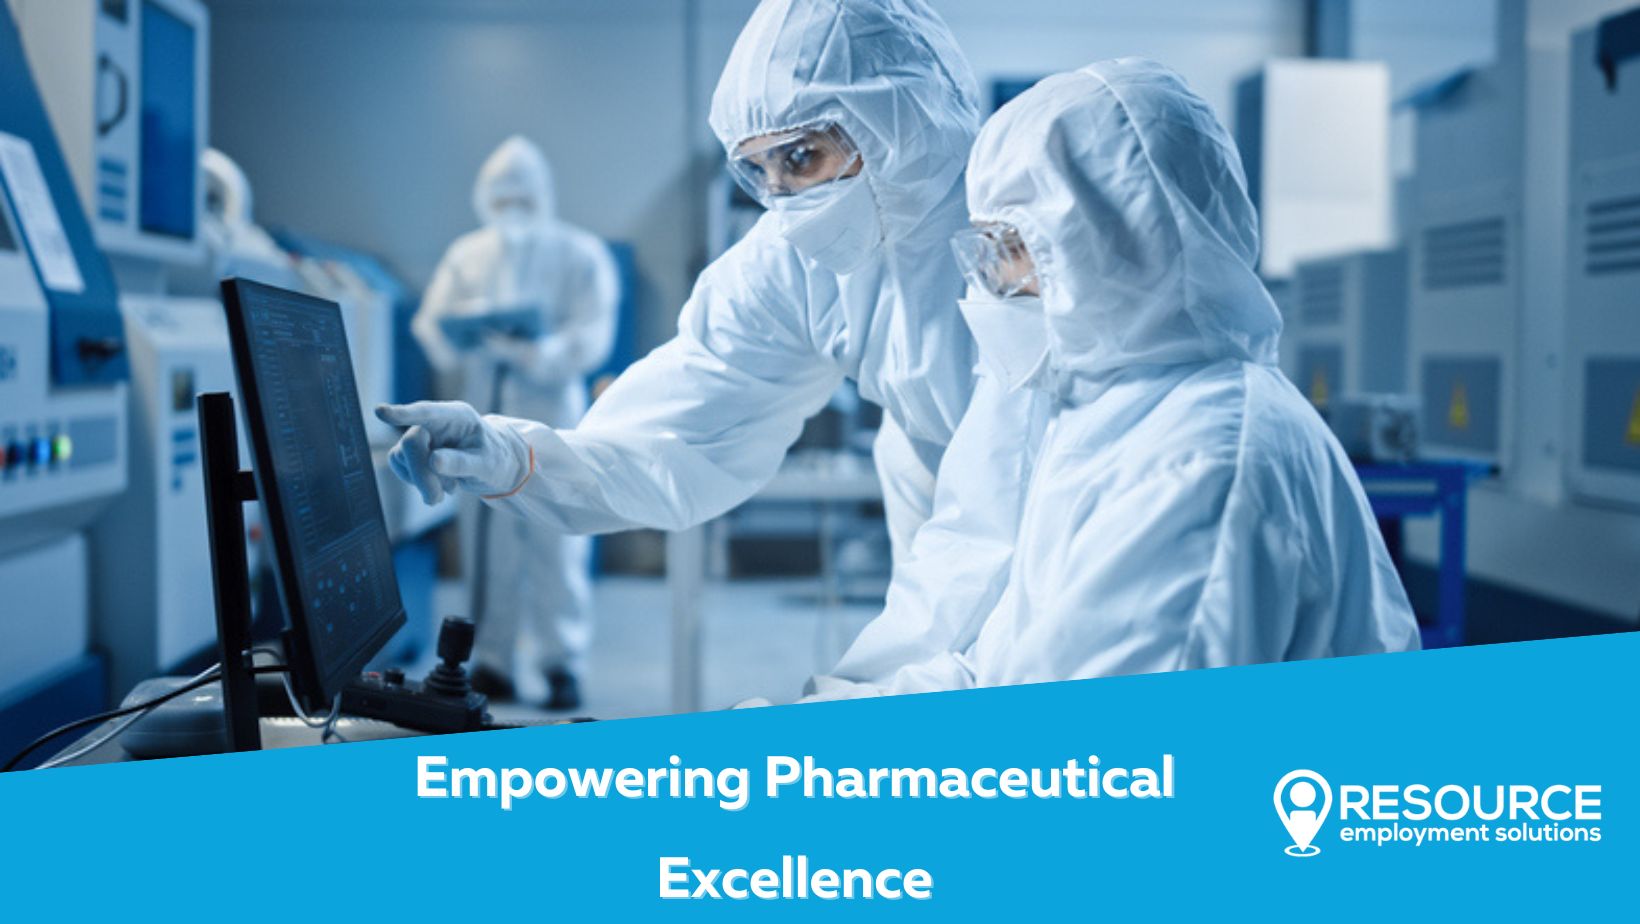 Empowering Pharmaceutical Excellence: Harnessing Human Capital with Resource Employment Solutions